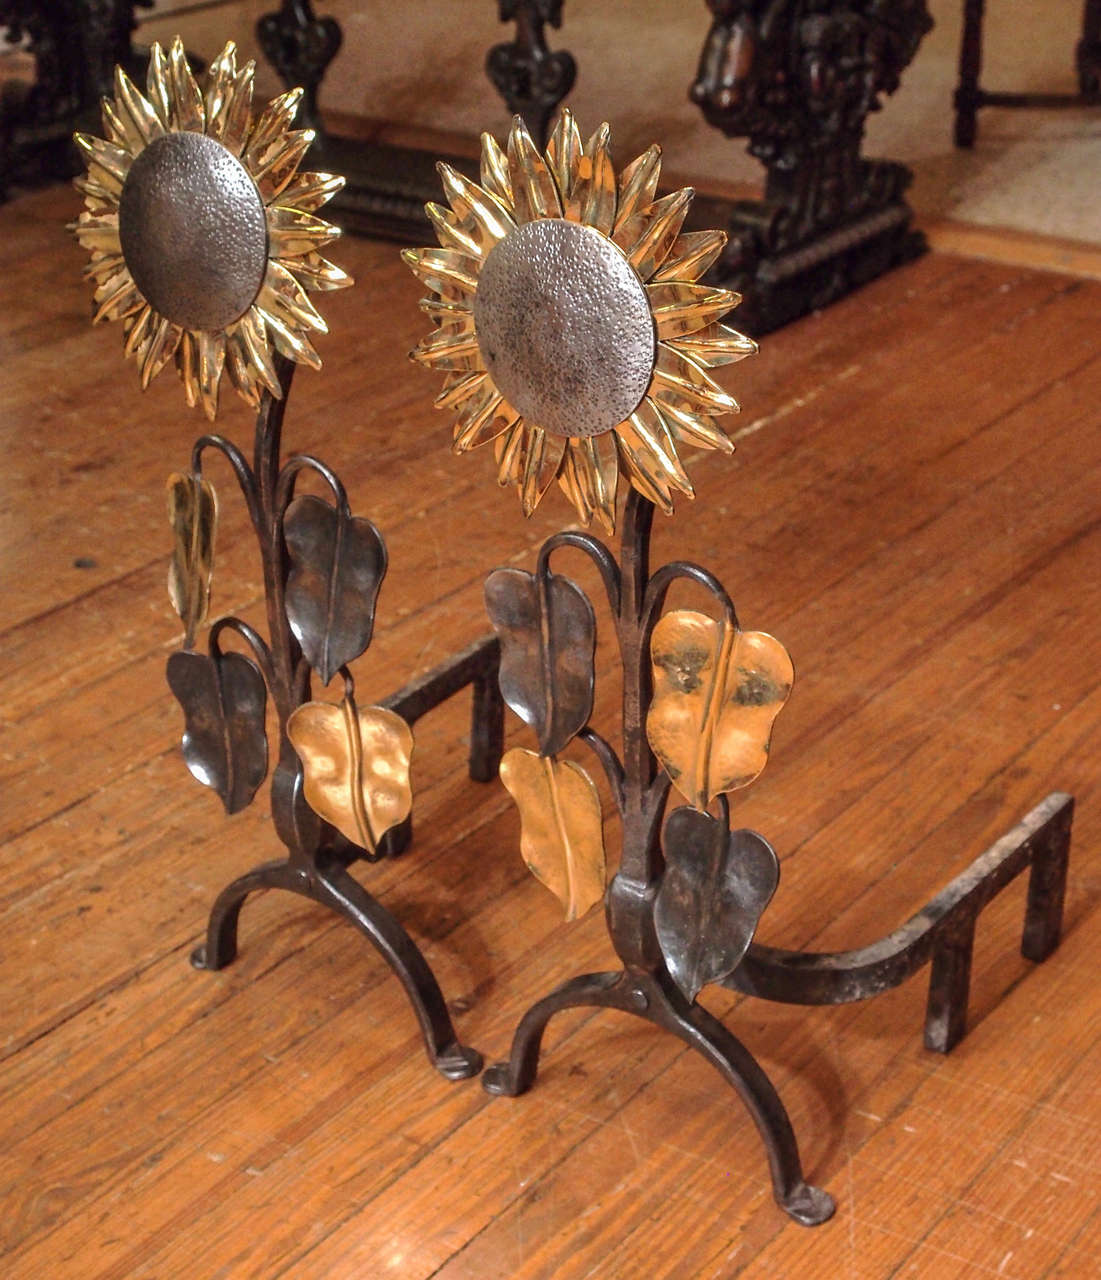 Pair Antique French Aesthetic Movement Polished Steel and Bronze Andirons
Designed by Thomas Jeckyll for the Peacock Room, dining room of London shipping giant Frederick Leyland.